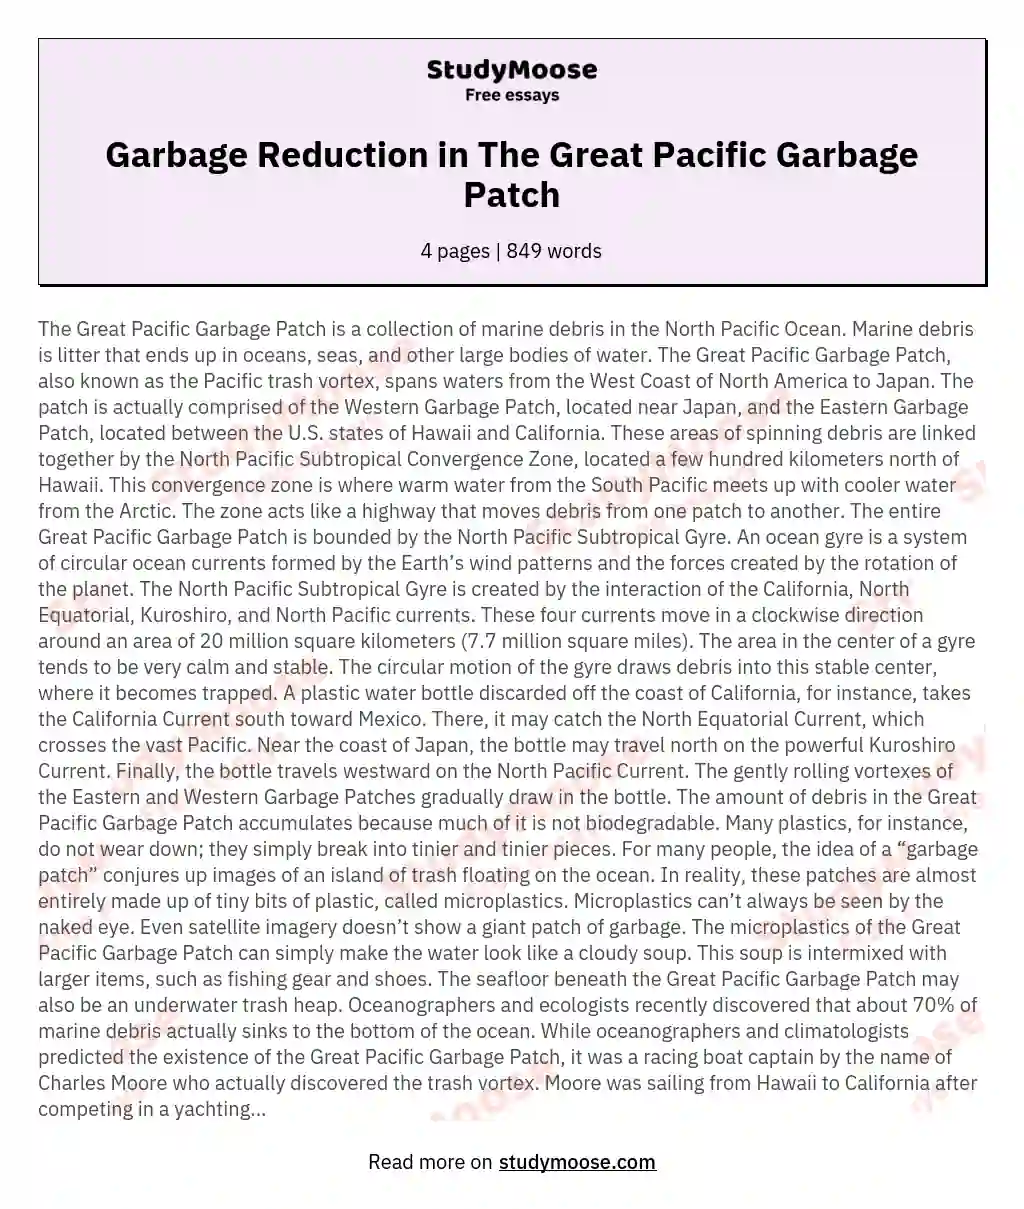 Garbage Reduction in The Great Pacific Garbage Patch